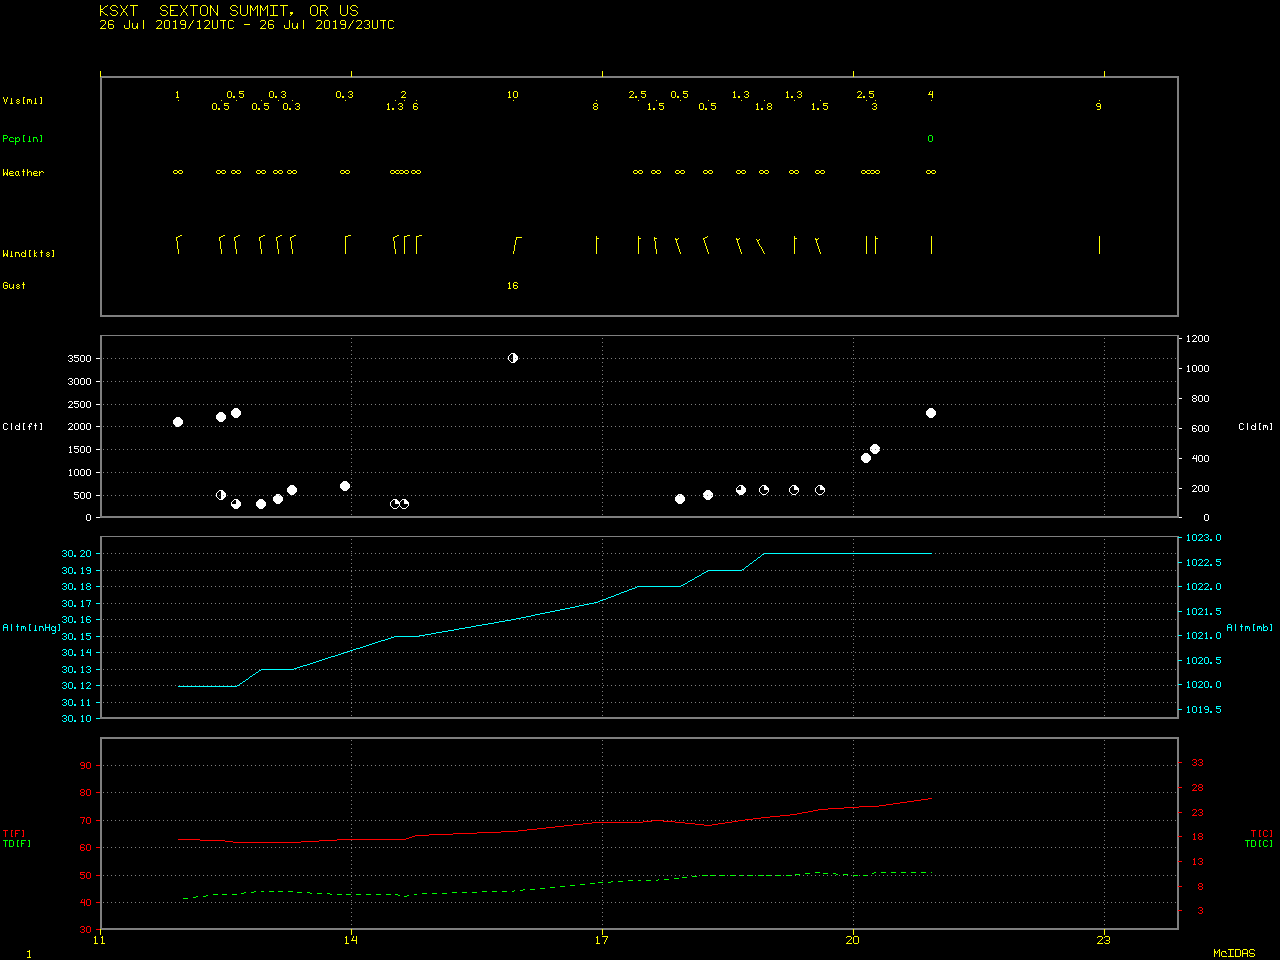 Time series of surface data from Sexton Summit [click to enlarge]